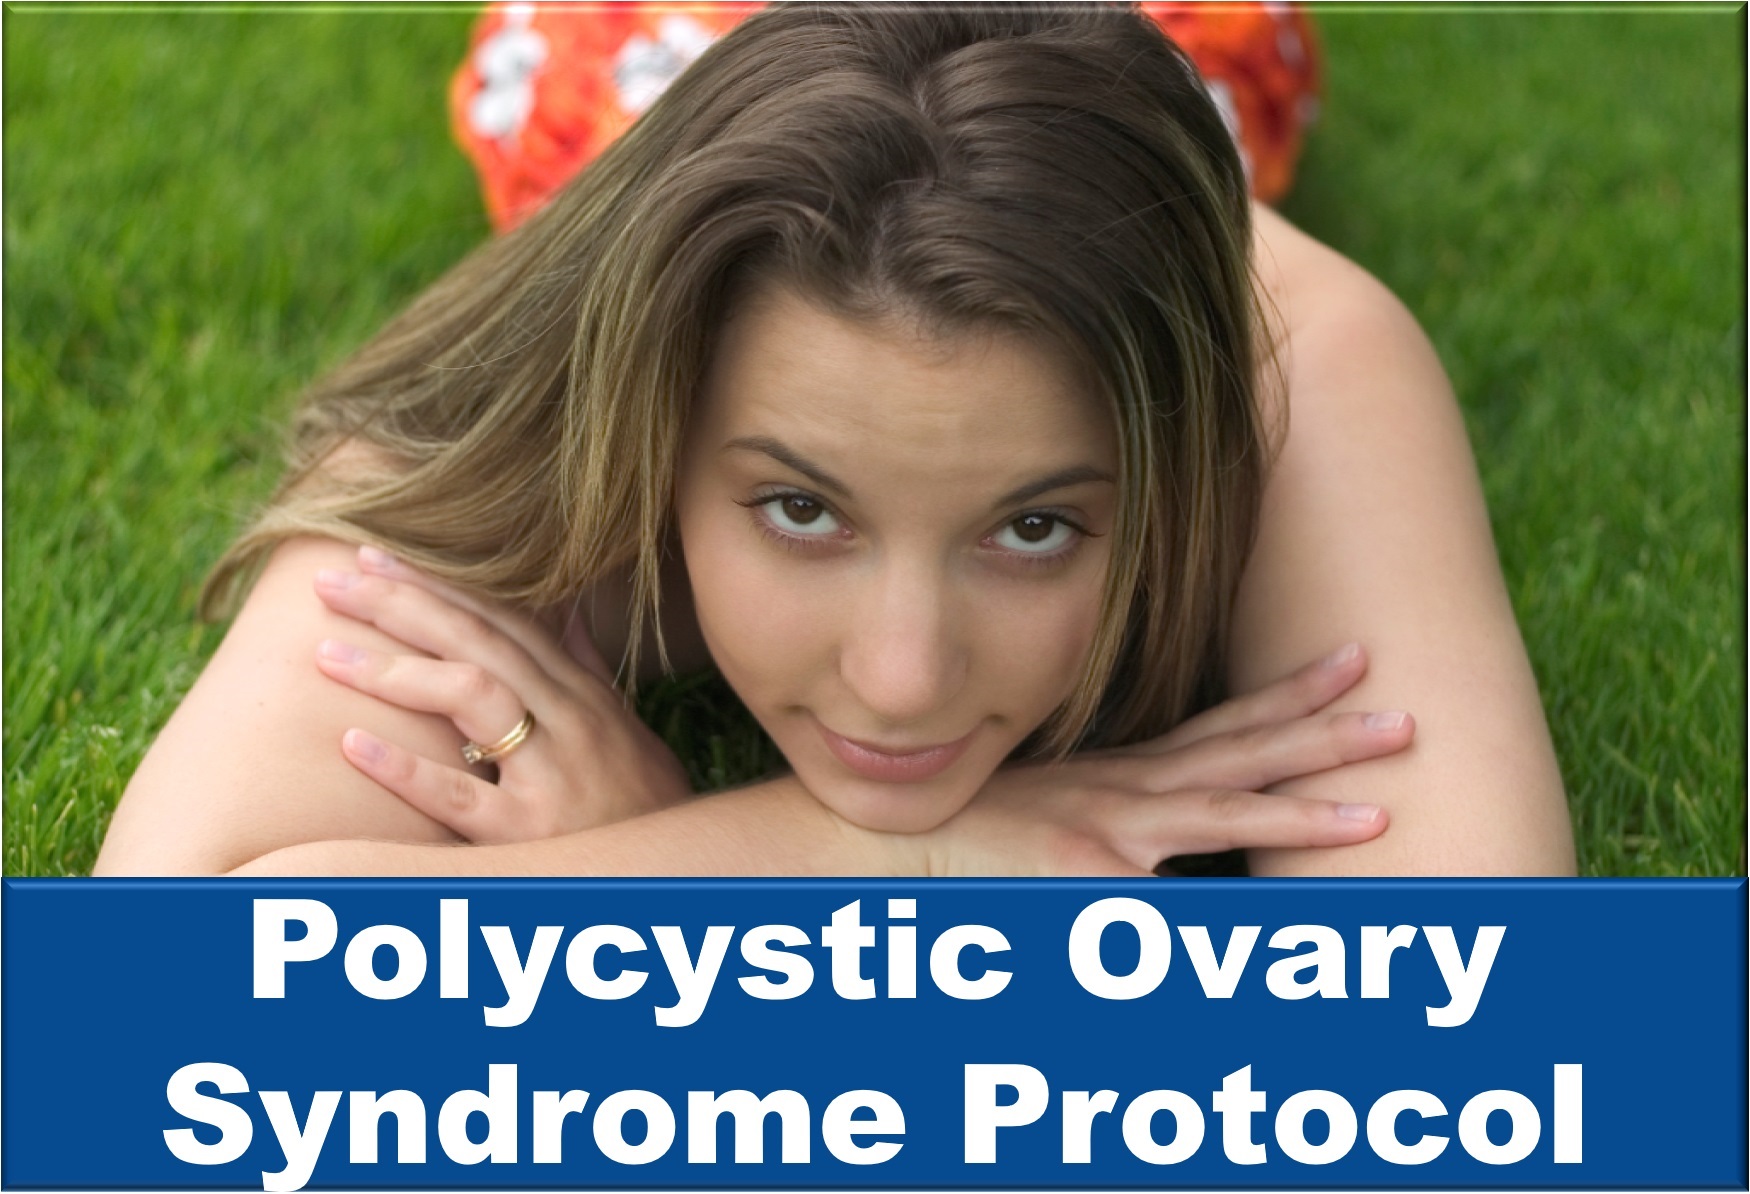 Learn about the Polycystic Ovary Syndrome Protocol 